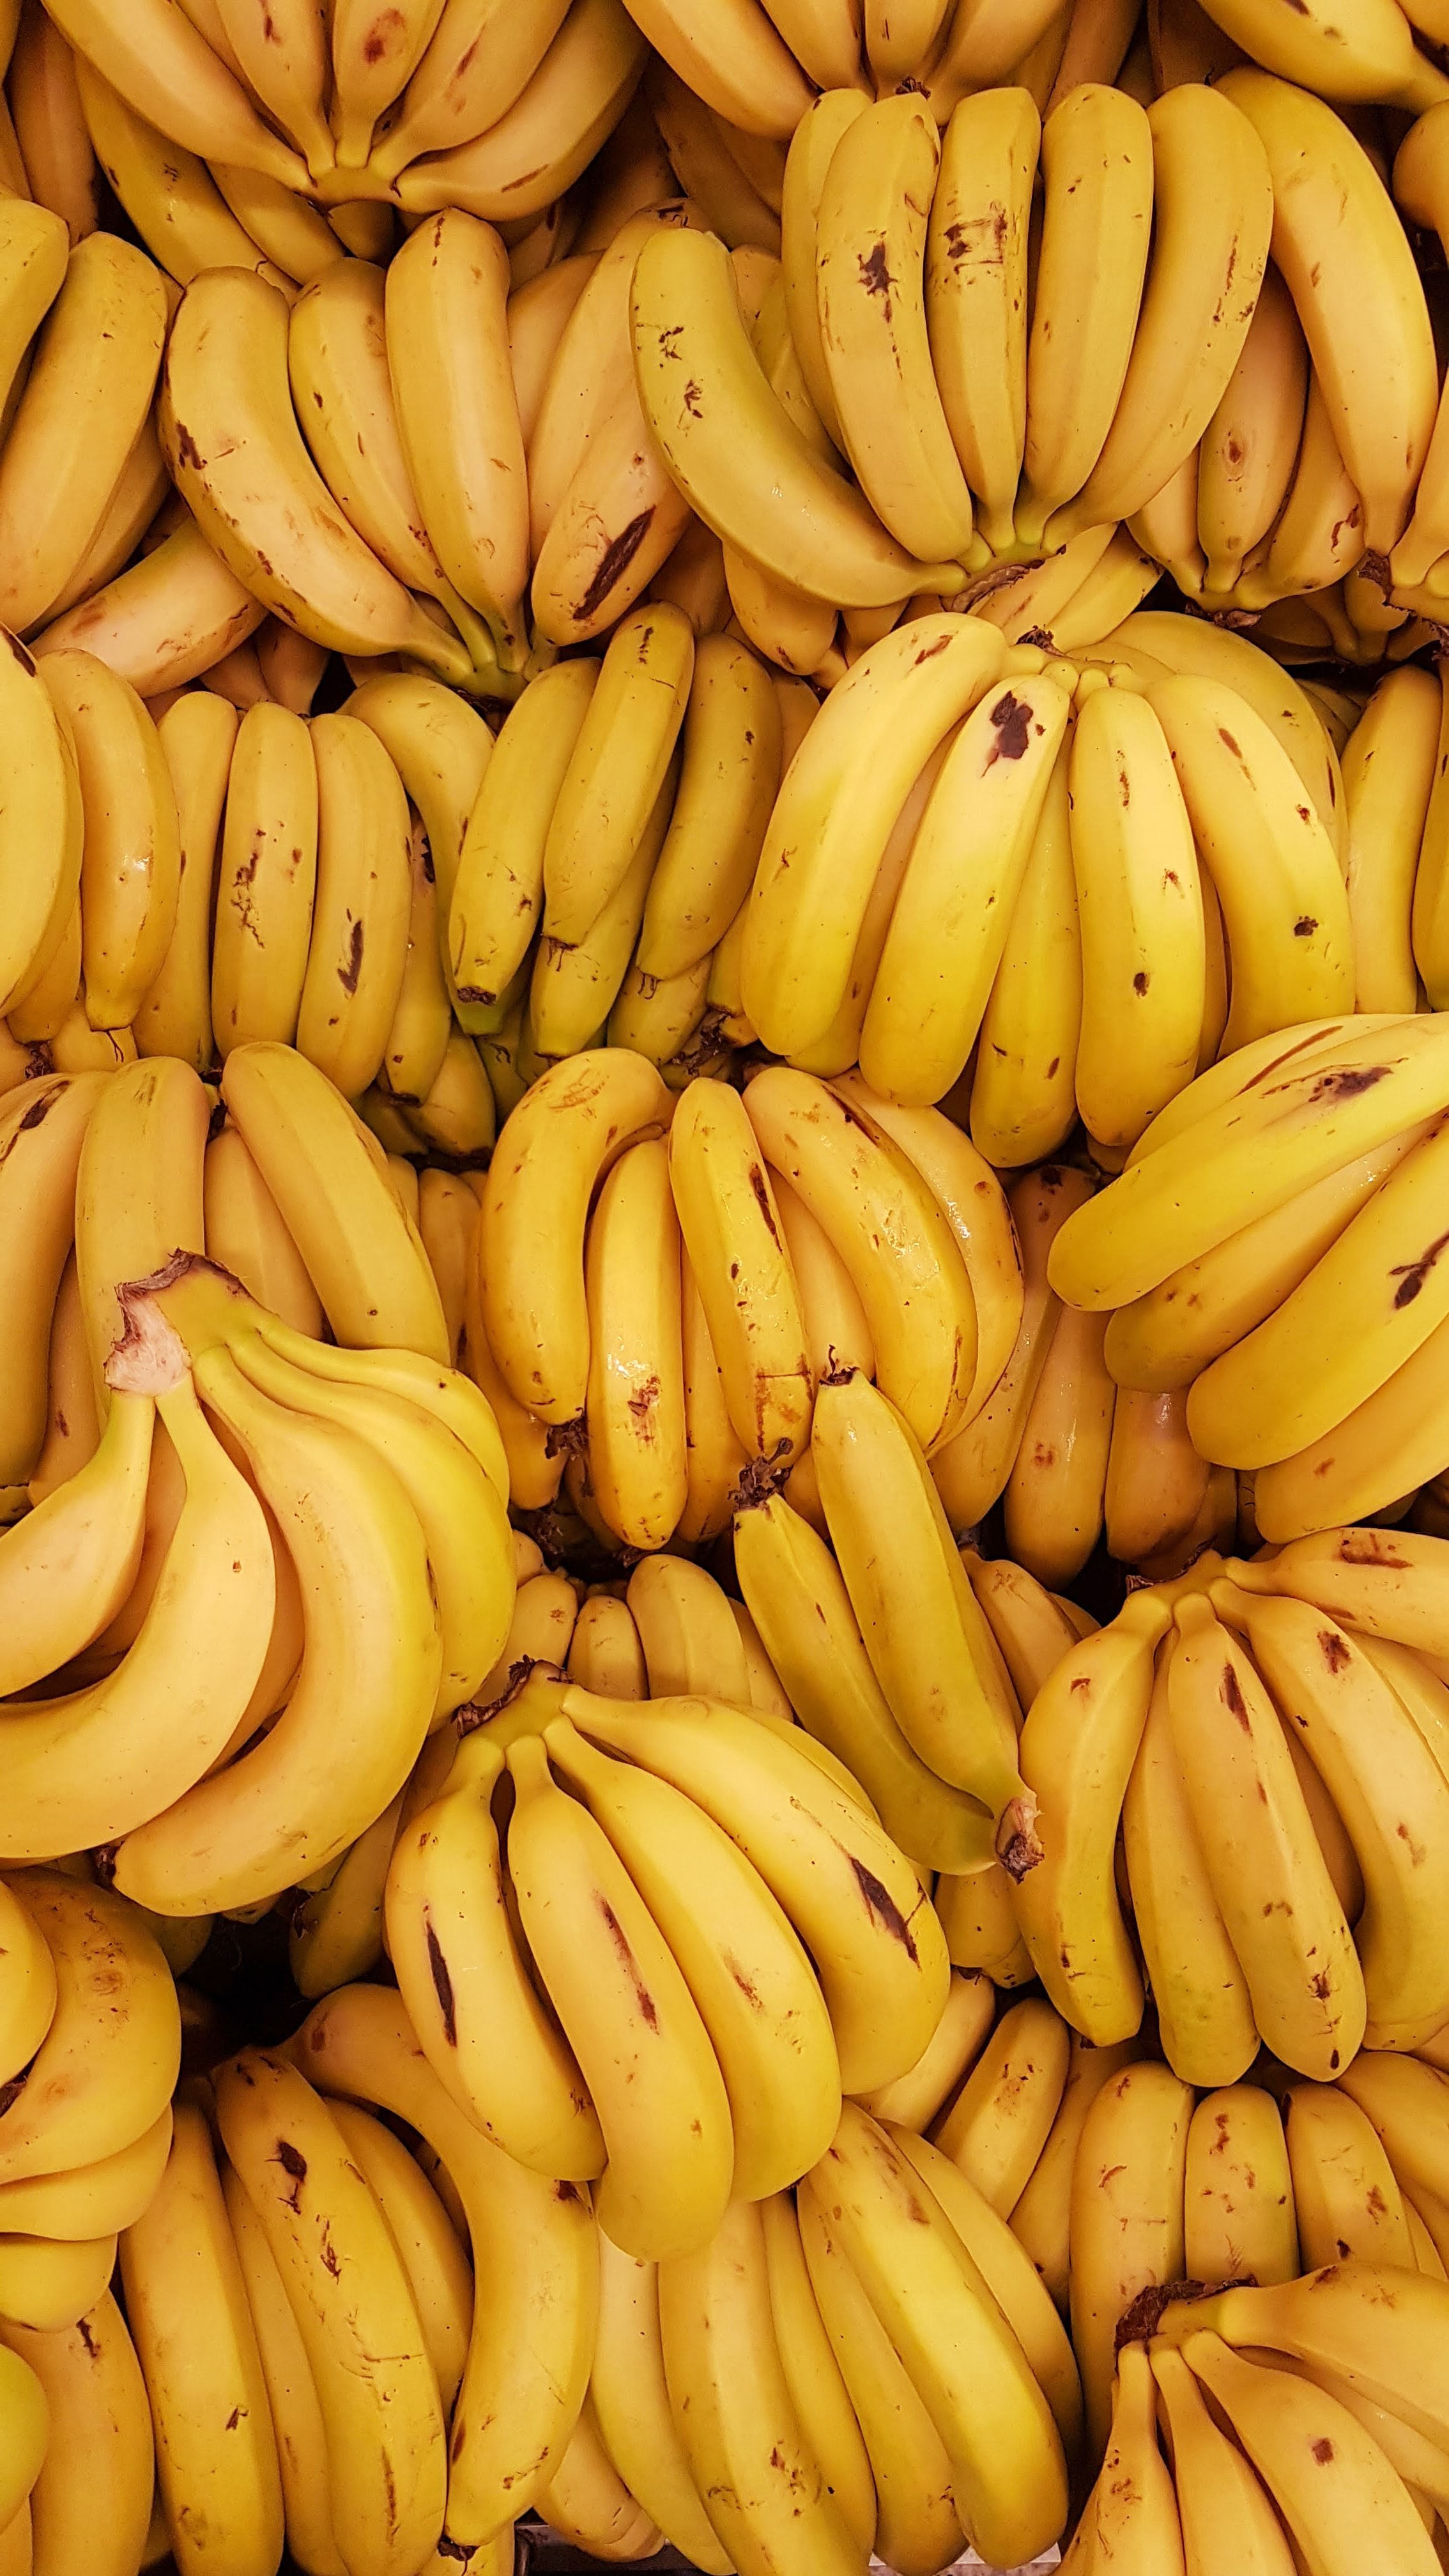 fruits, food, bananas, yellow, bunches, clusters Image for desktop